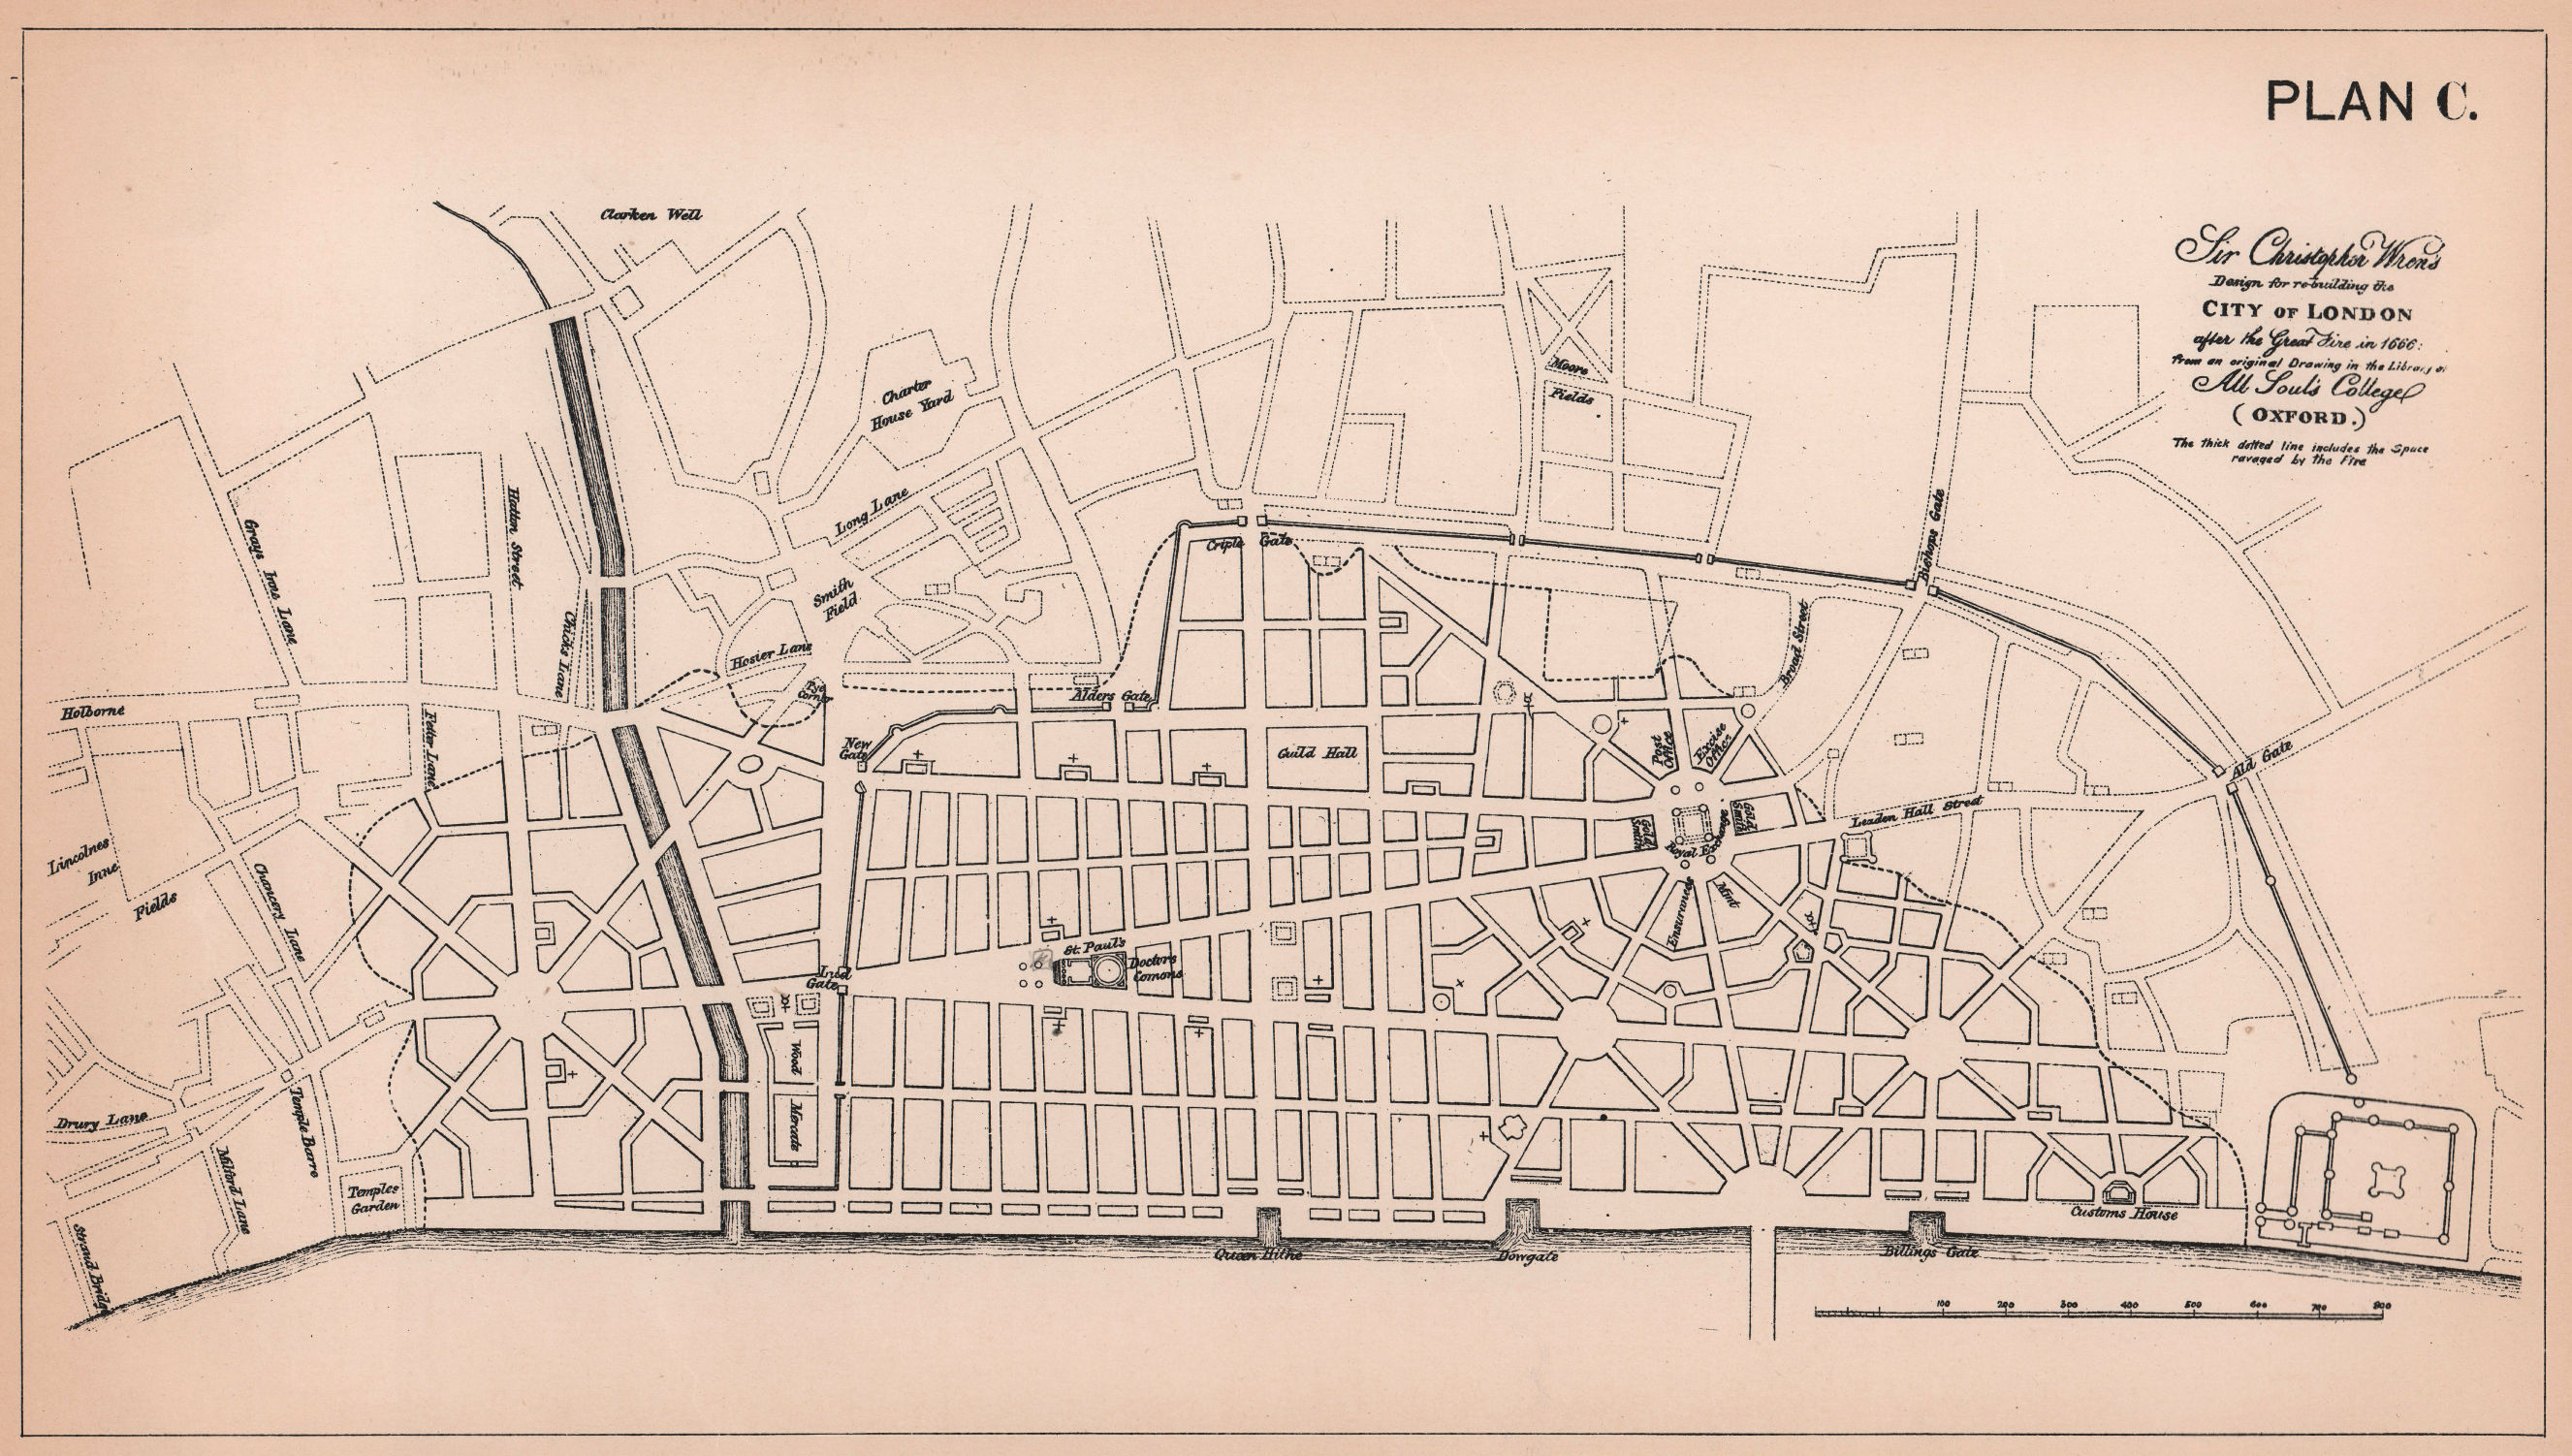 Associate Product Wren's design for rebuilding the City of London after the Great Fire 1898 map